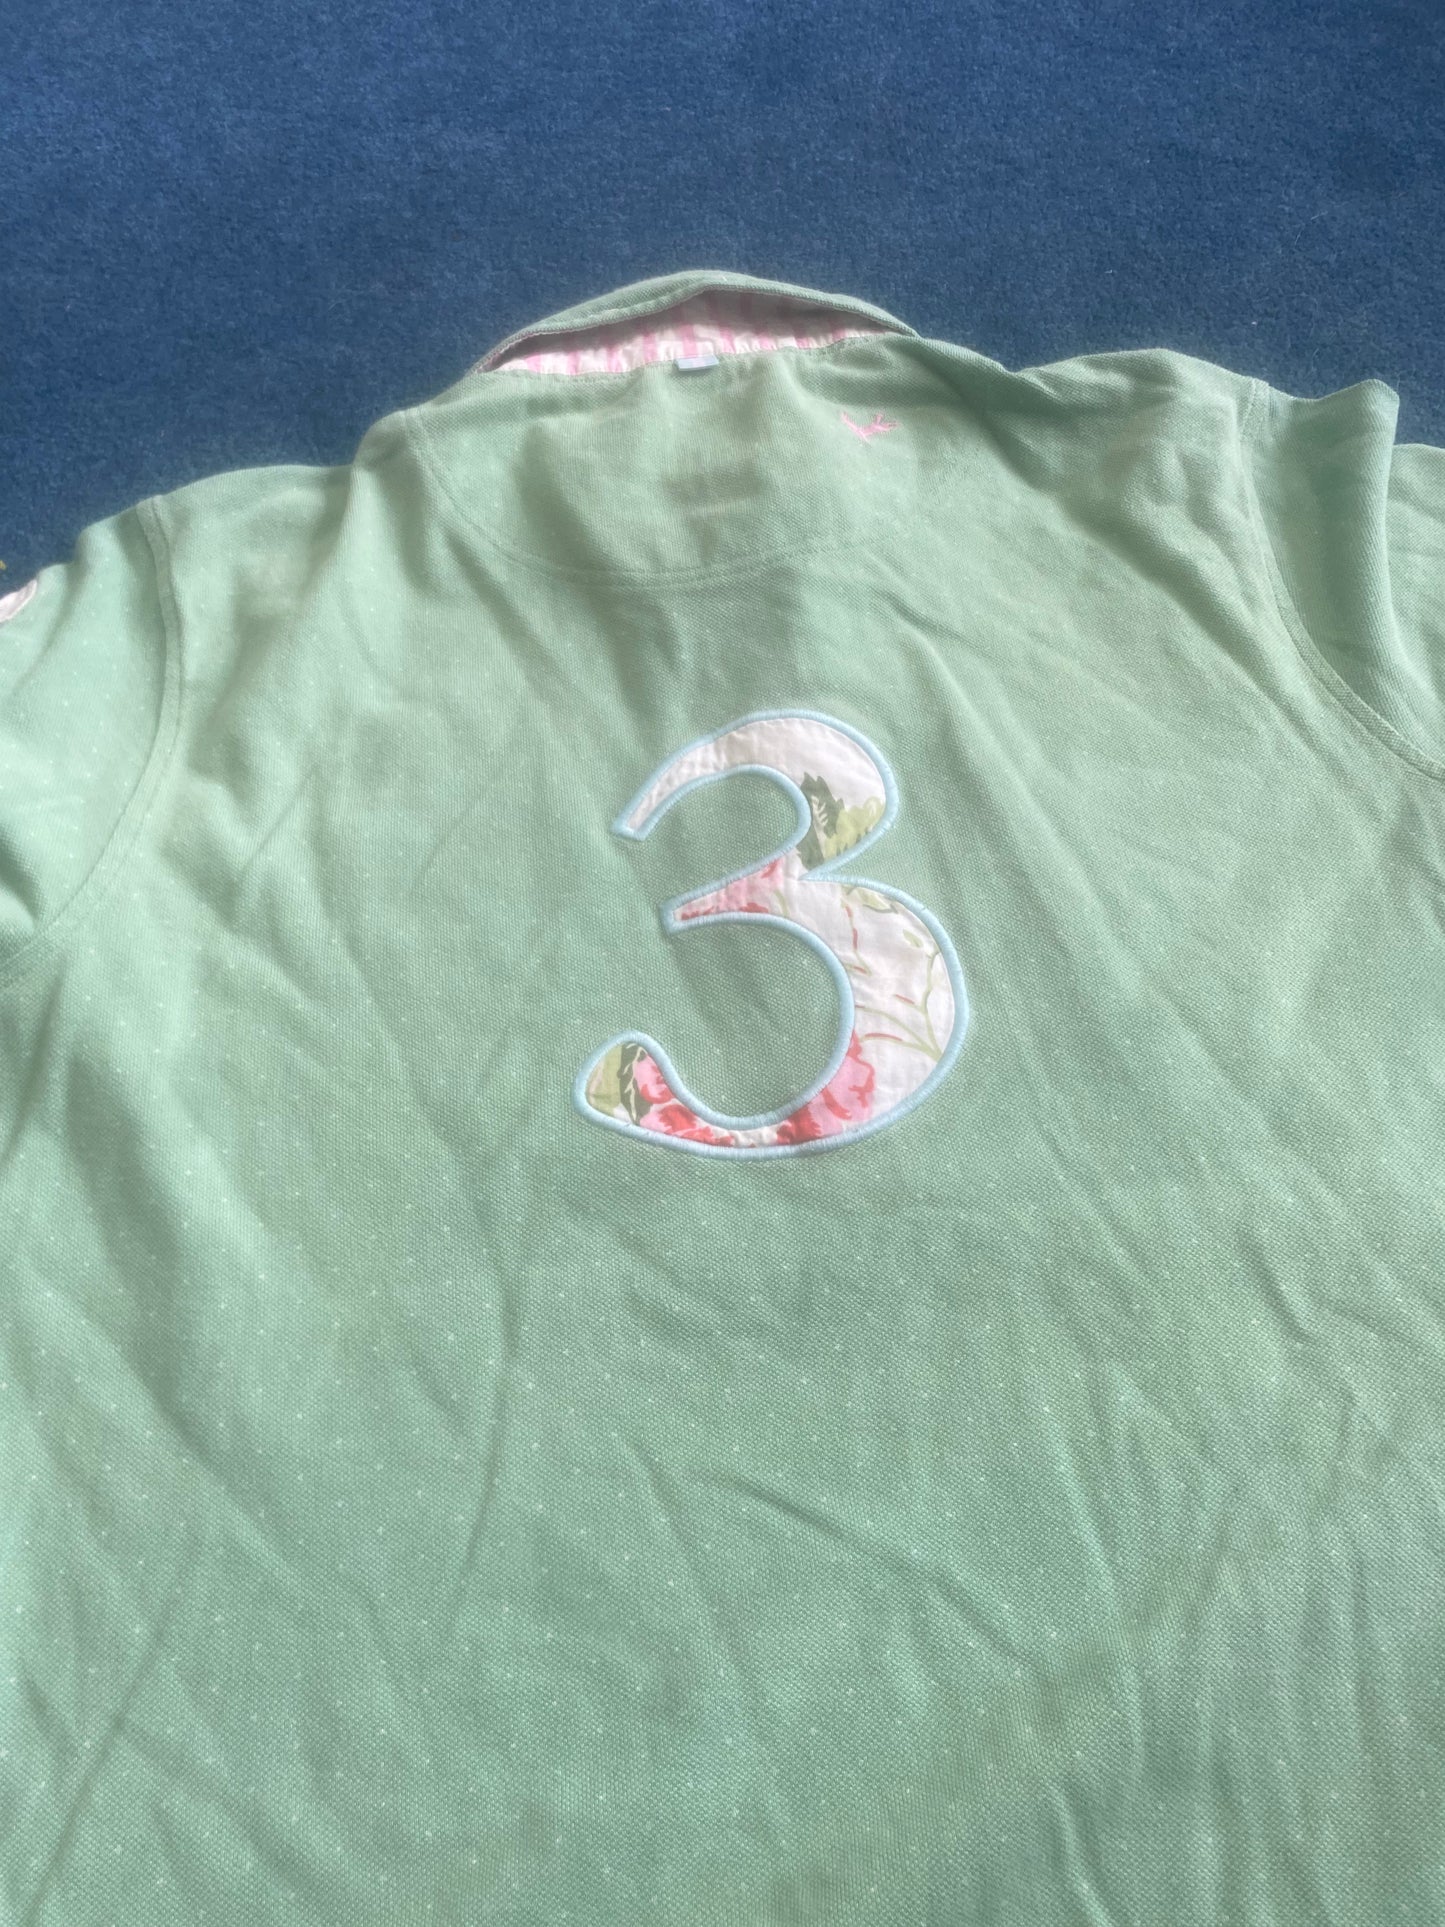 Joules mint green t shirt size 16 FREE POSTAGE❤️